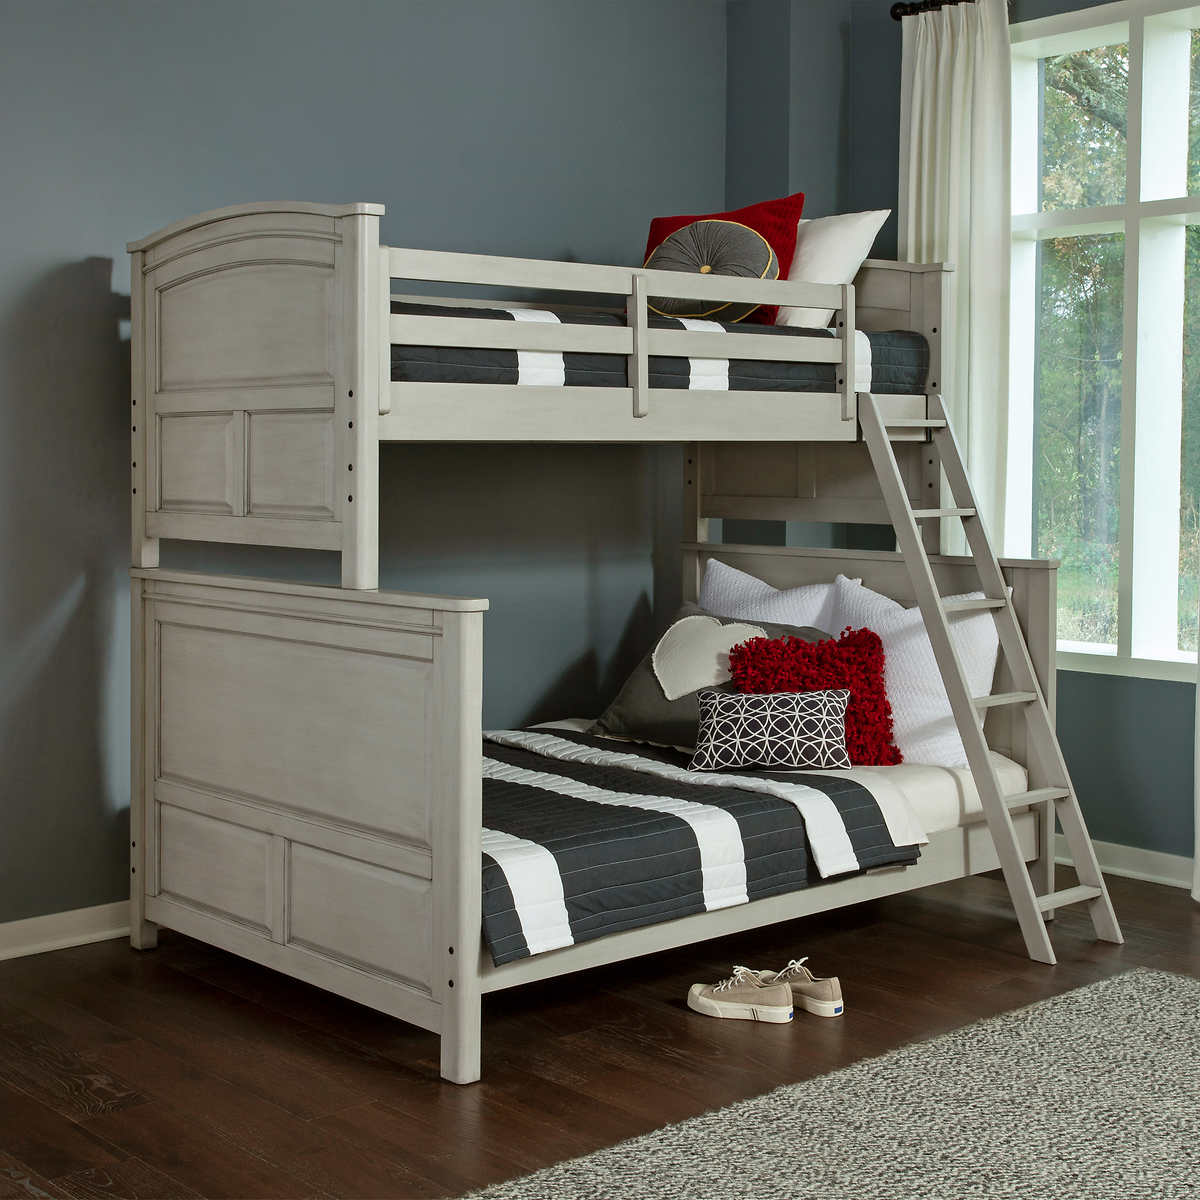 Wingate Twin Over Full Bunk Bed Costco, Bunk Beds Com